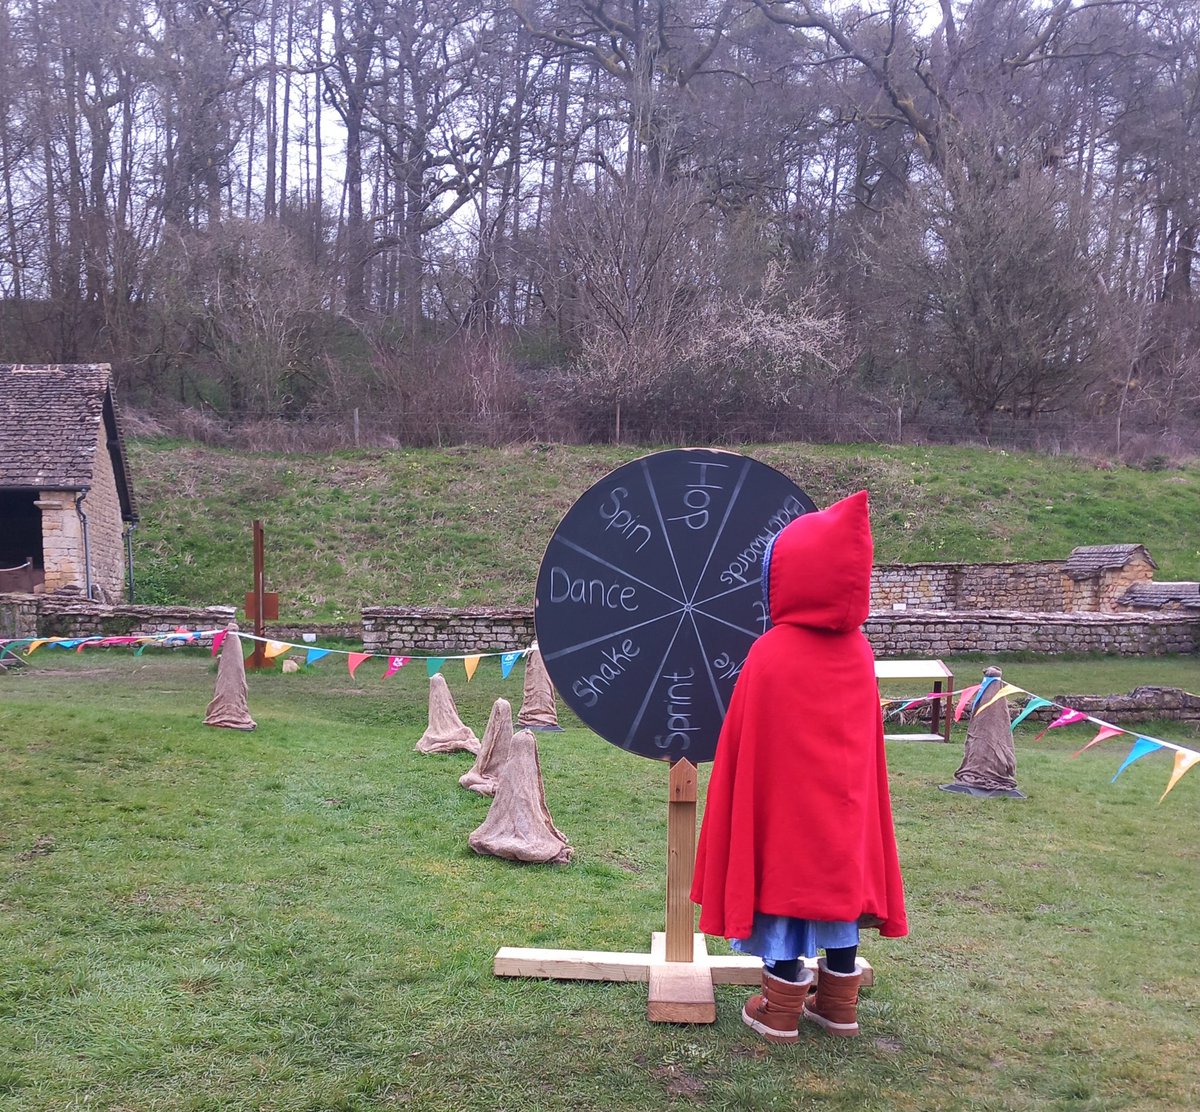 All dressed up and getting ready to sprint around the 'chariot arena' 😀 #Easter #FamilyFun #Play